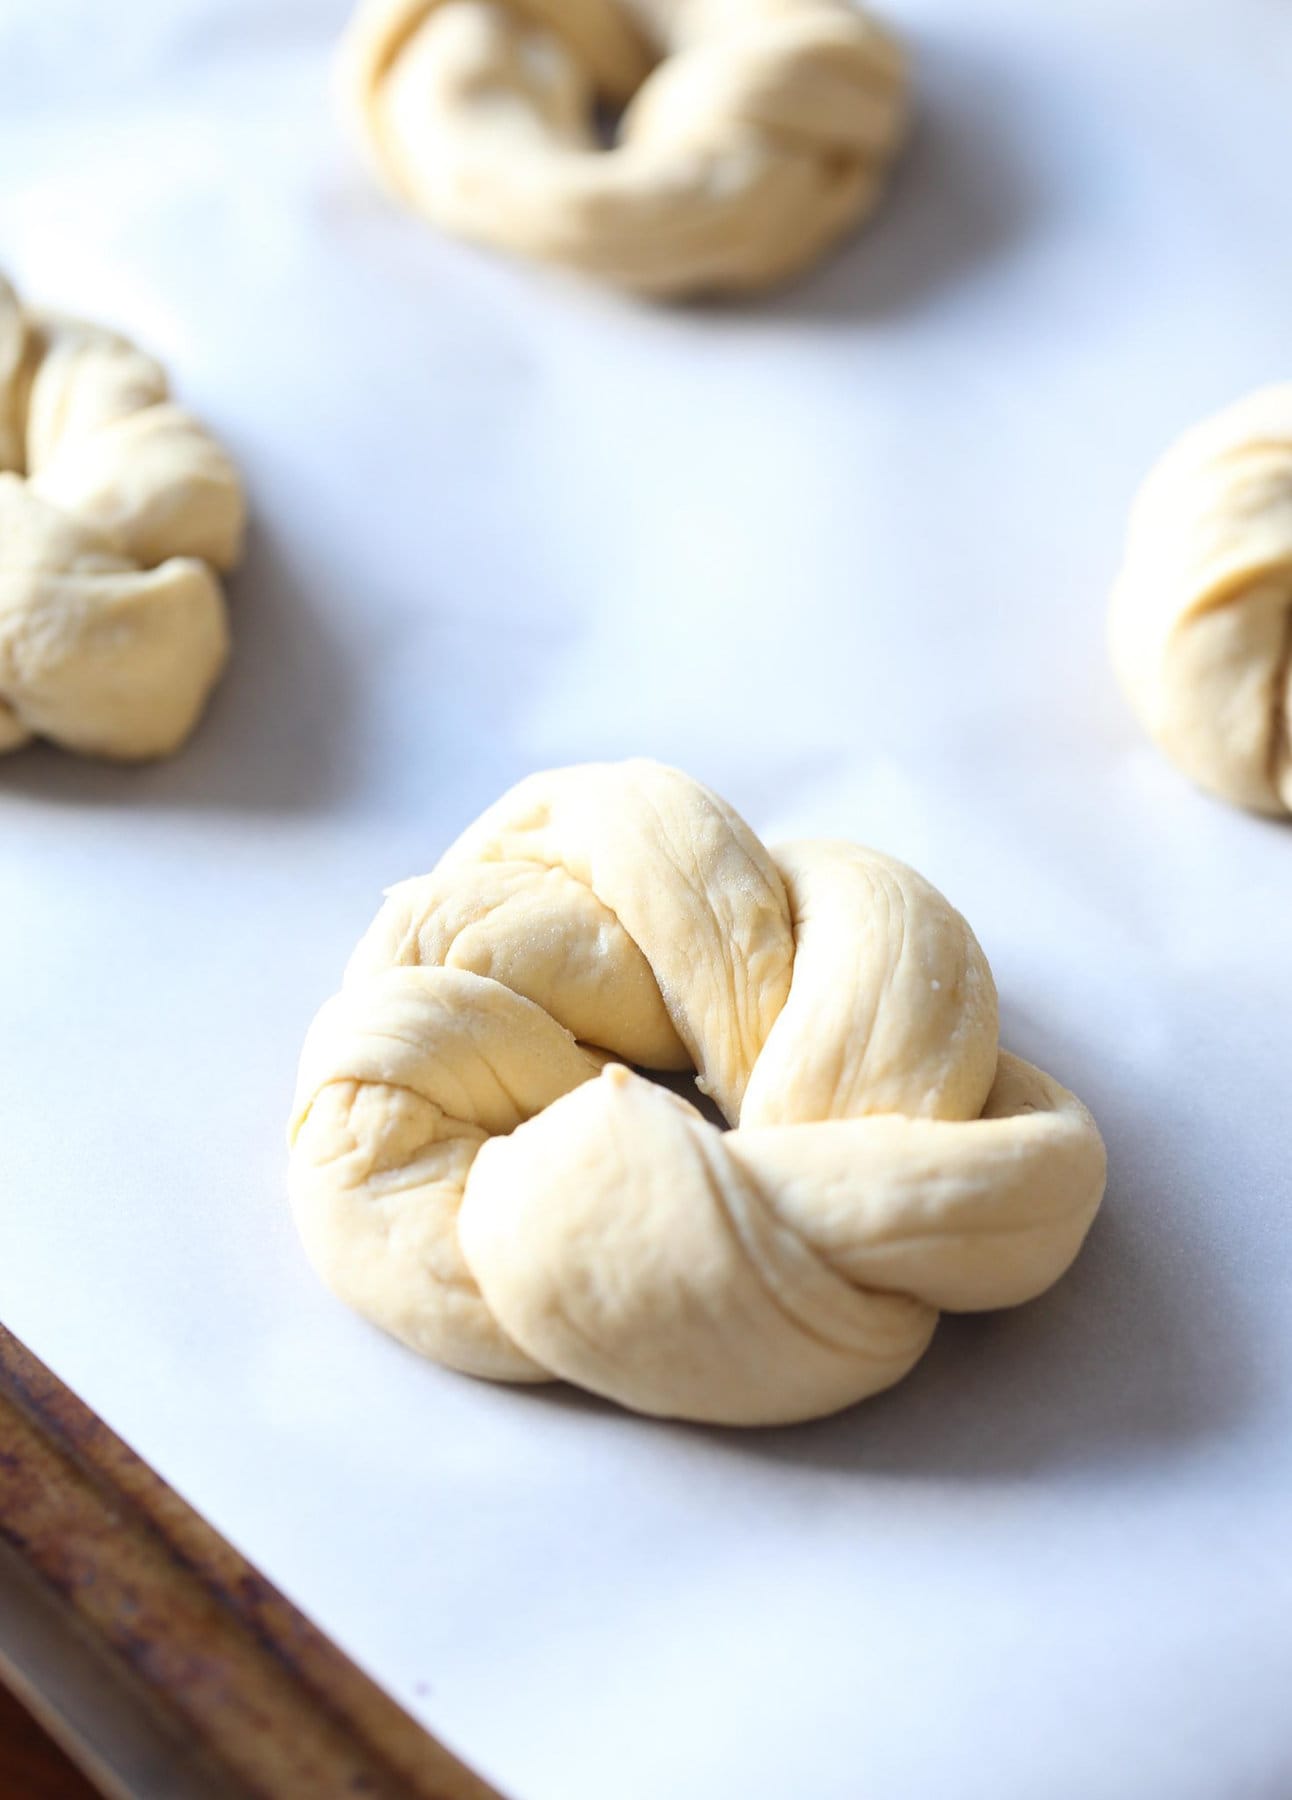 Formed garlic knot on a sheet ready to bake